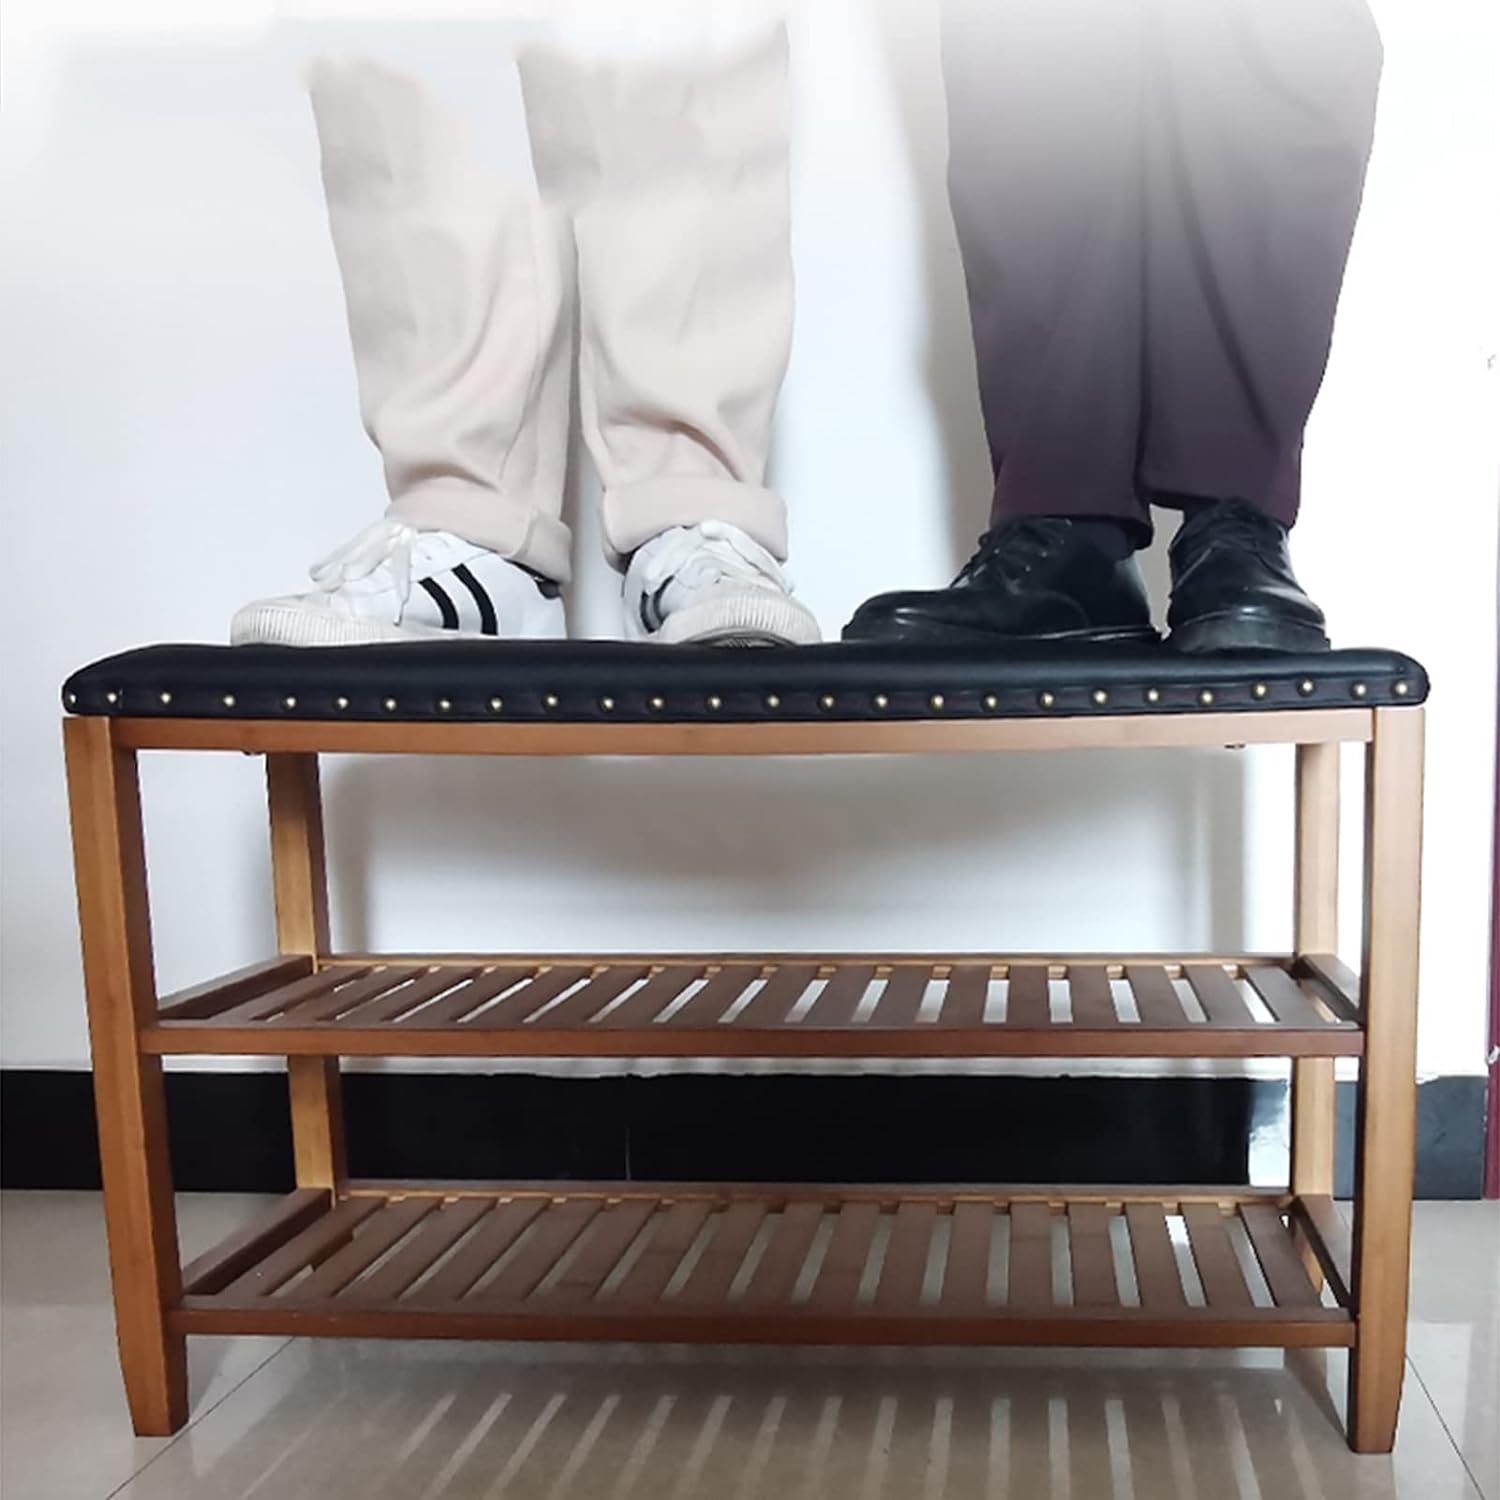 (Net)3-Tier Bamboo Shoe Rack Bench with Leather Seat - Your Stylish and Eco-Friendly Shoe Storage Solution / 003883